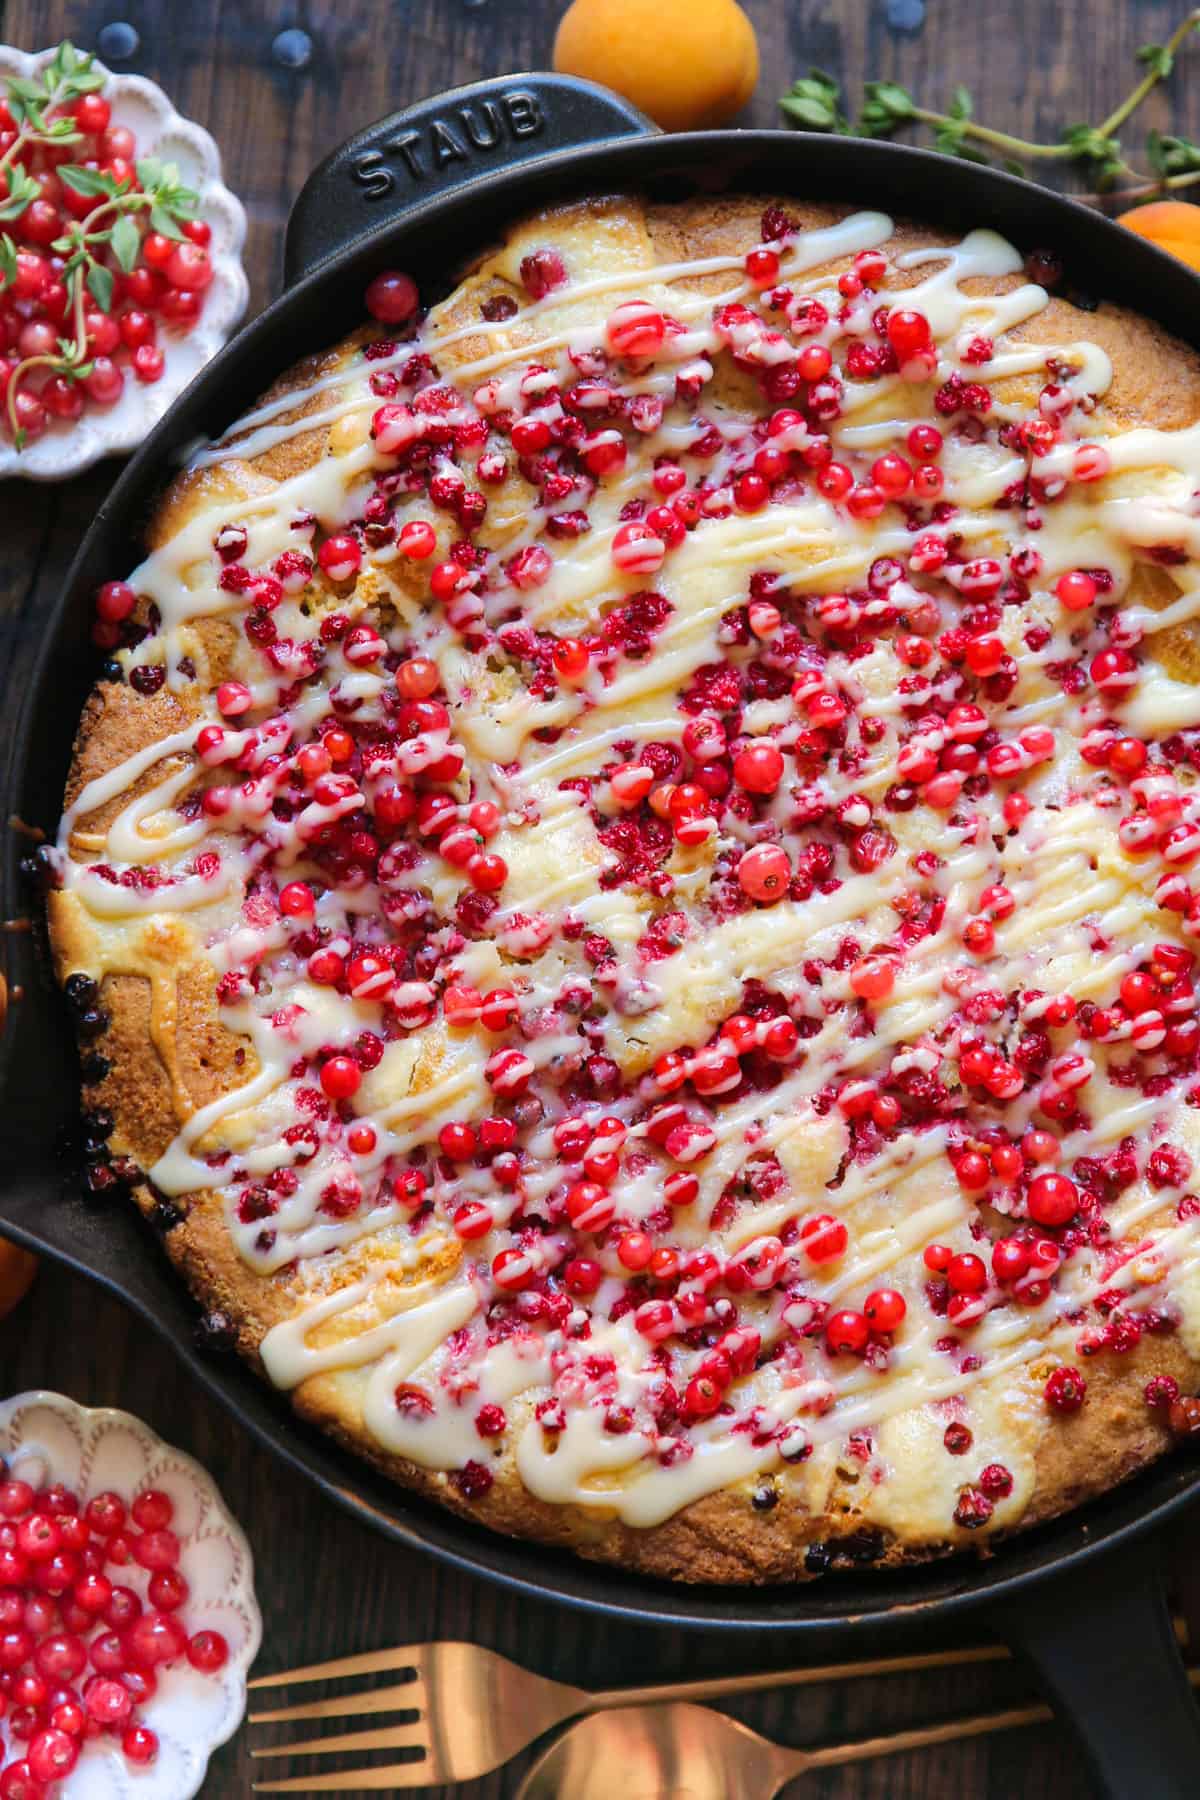 Red Currant Cake with the Cream Cheese Filling and with the Cream Cheese Topping drizzled on top - in a cast iron skillet.